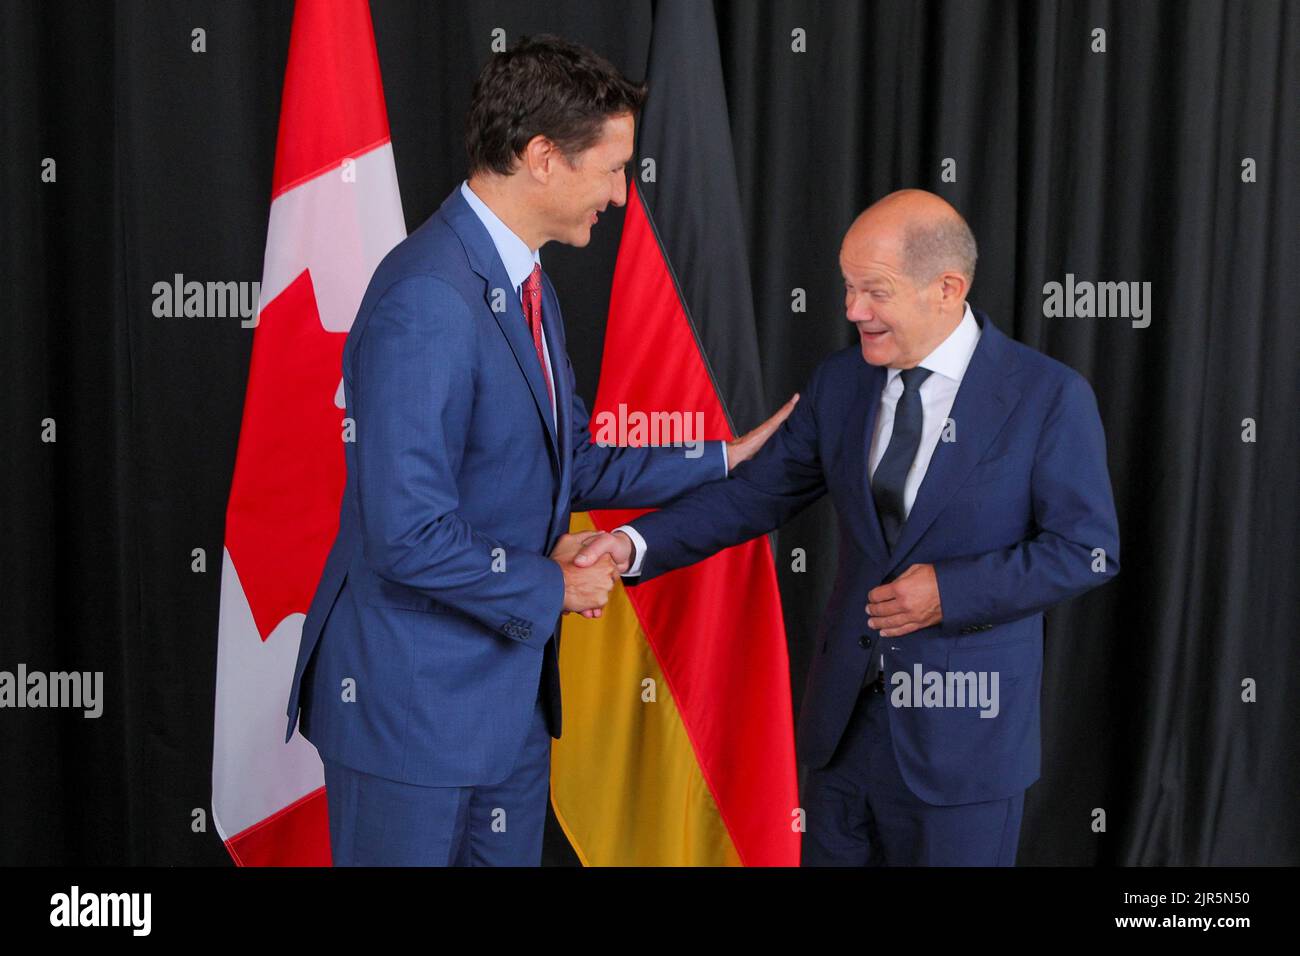 Canada's Prime Minister Justin Trudeau shakes hands with Germany's Chancellor Olaf Scholz during their meeting at the Montreal Science Centre in Montreal, Quebec, Canada August 22, 2022.  REUTERS/Christinne Muschi Stock Photo